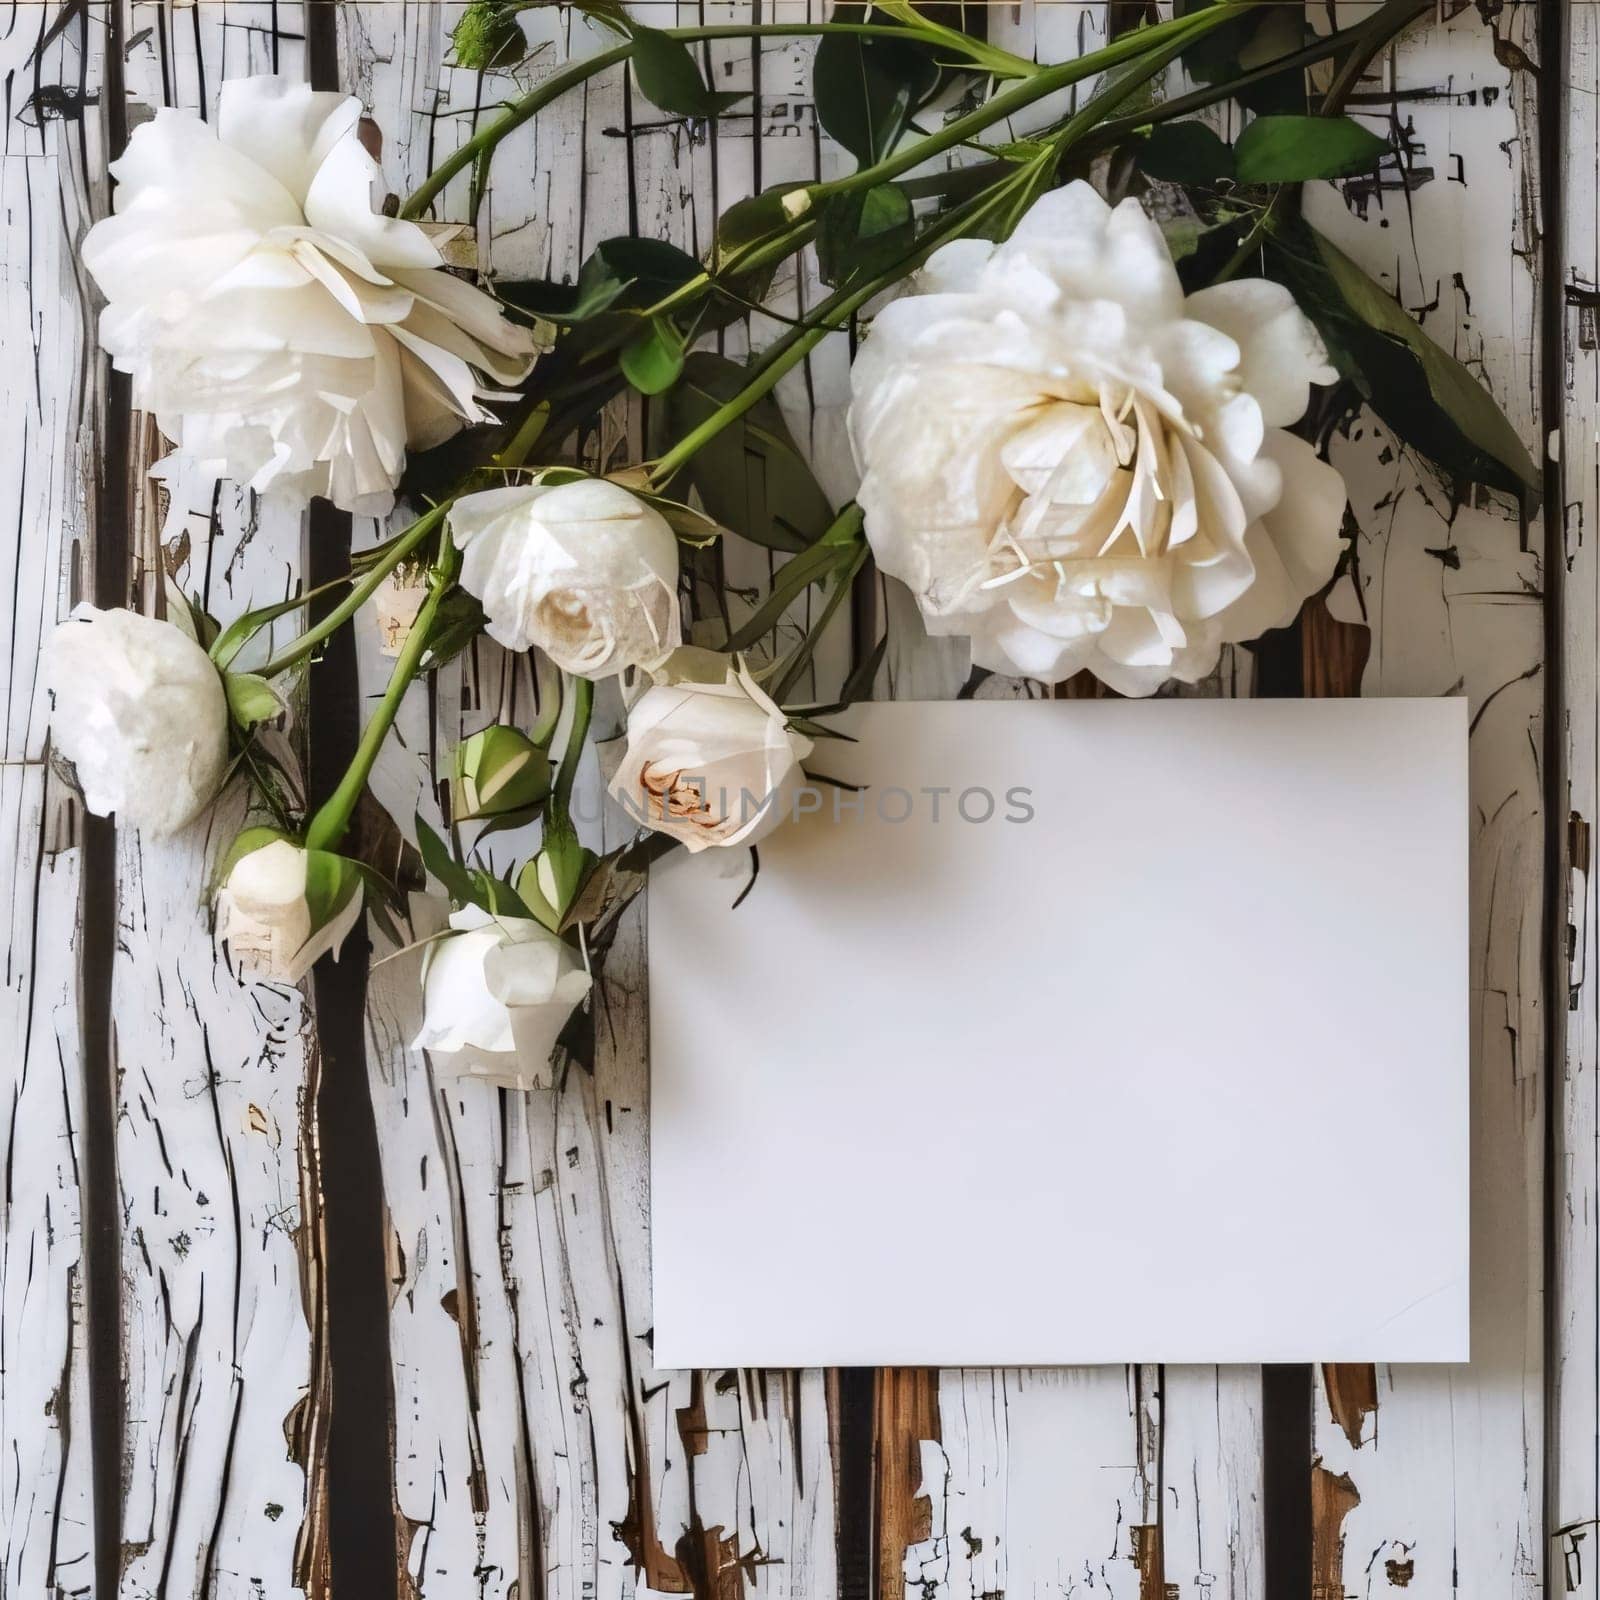 White blank card on a wooden background around white flowers. Places on their own content. Flowering flowers, a symbol of spring, new life. A joyful time of nature waking up to life.